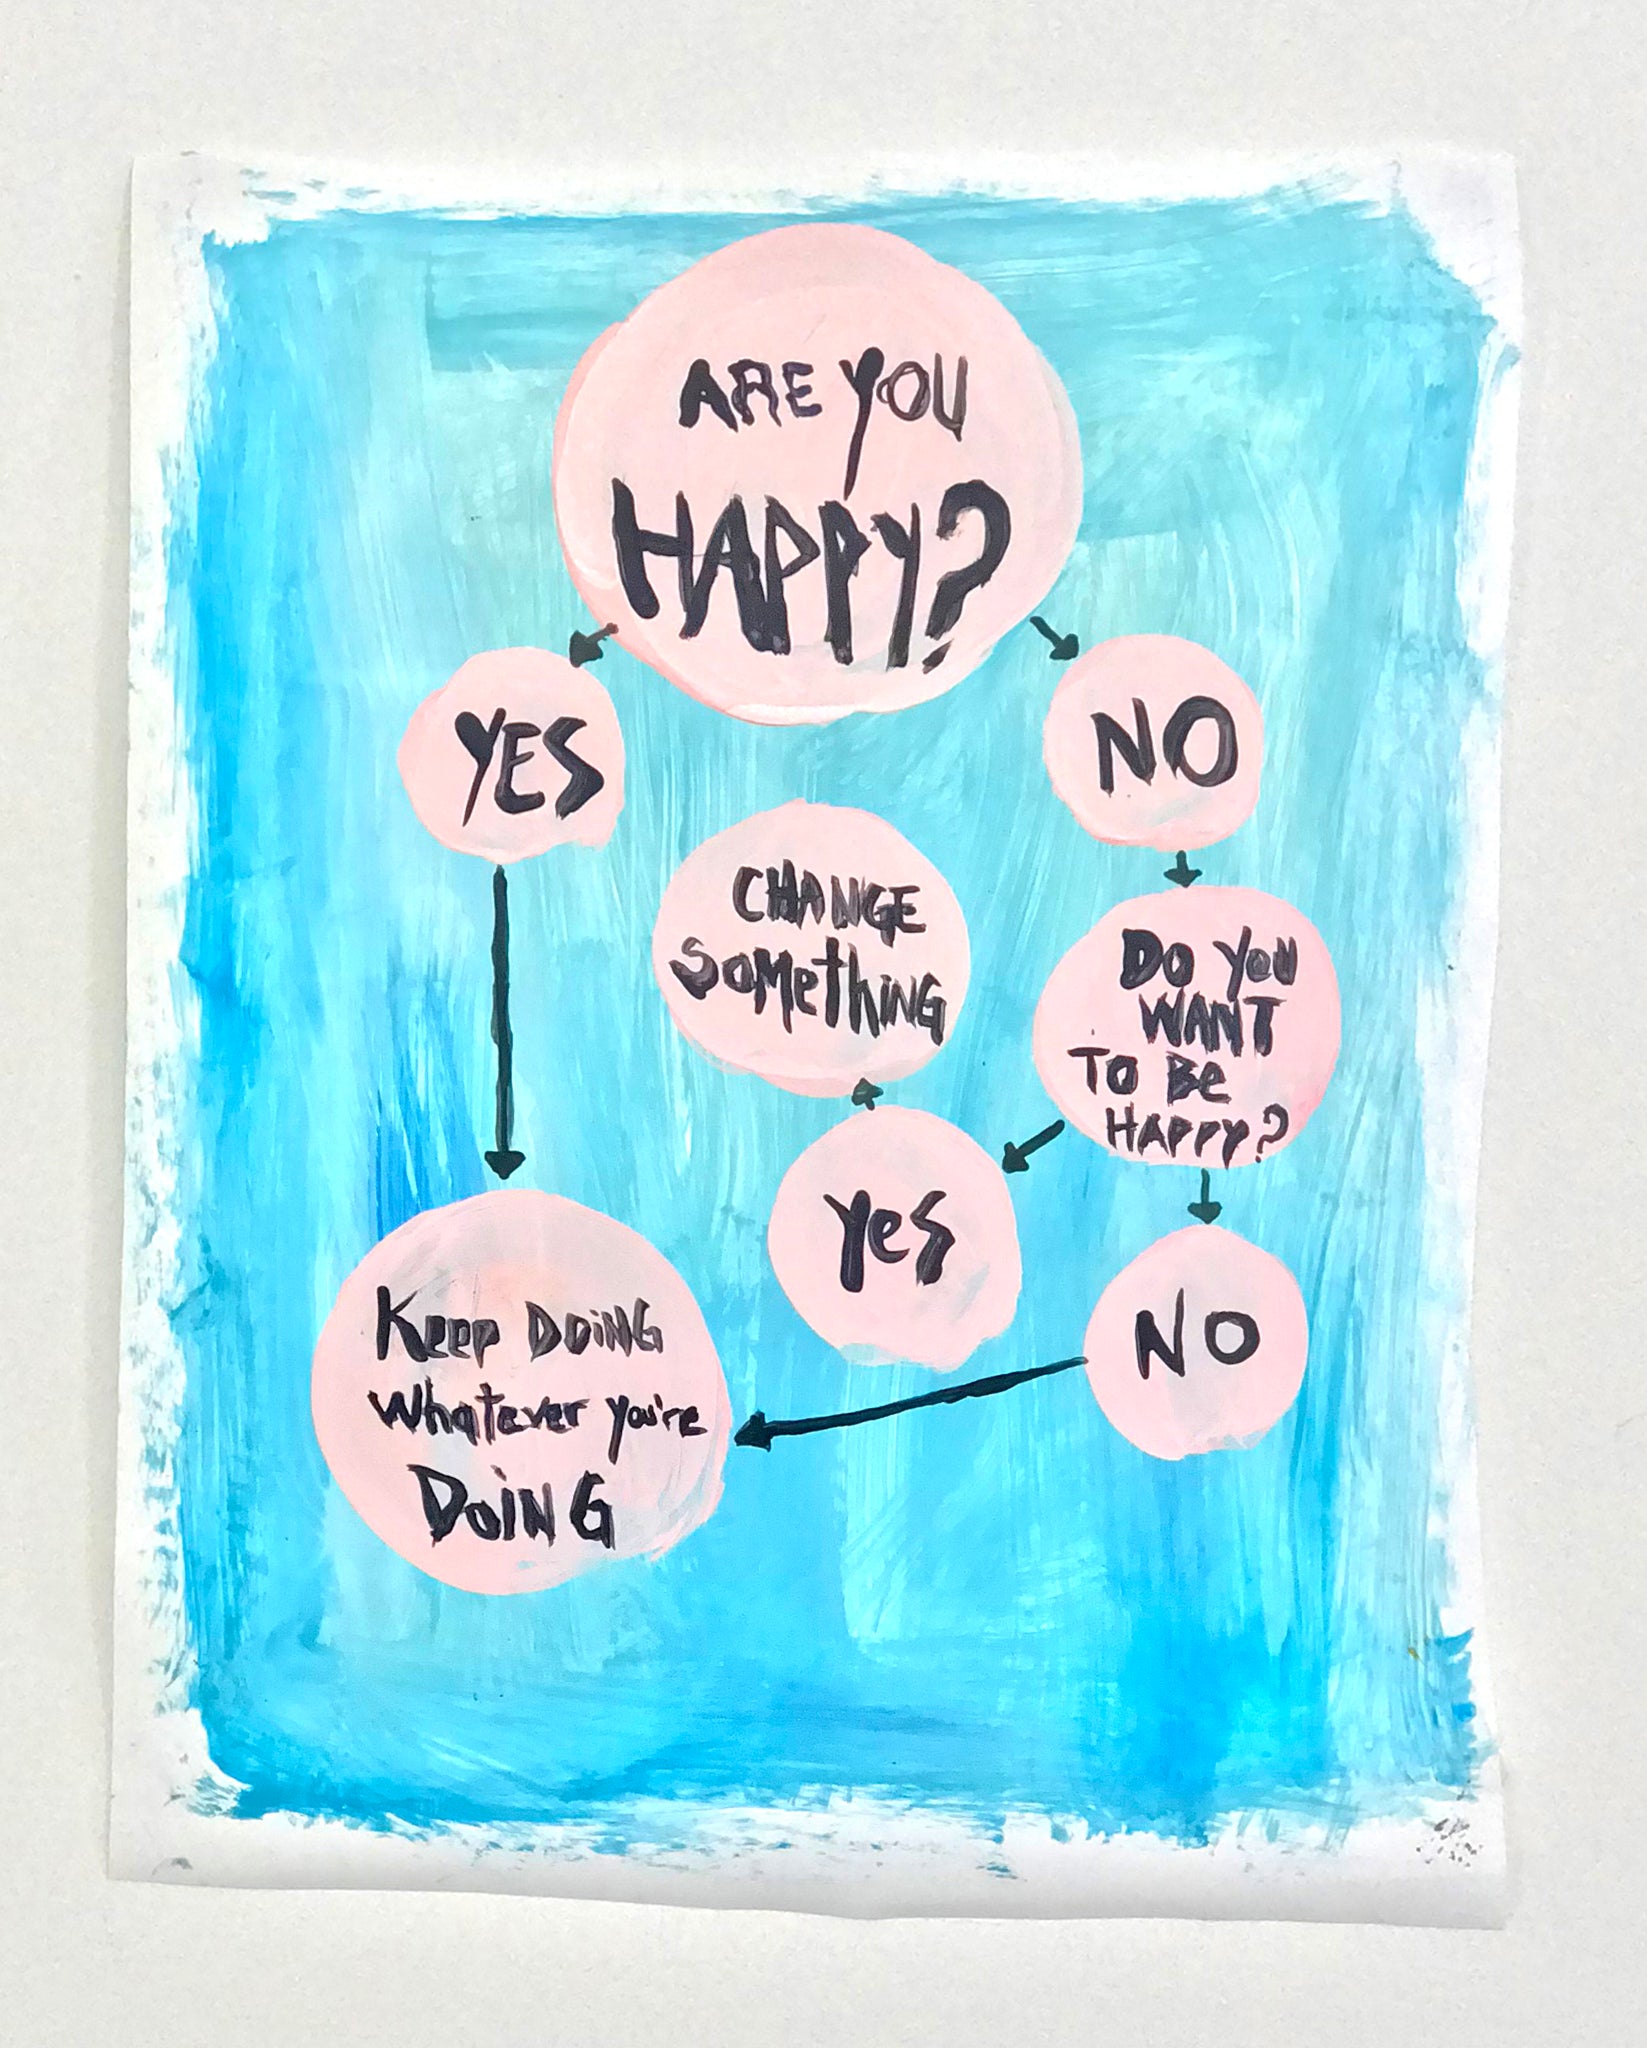 Alison Woods, "Are You Happy?"